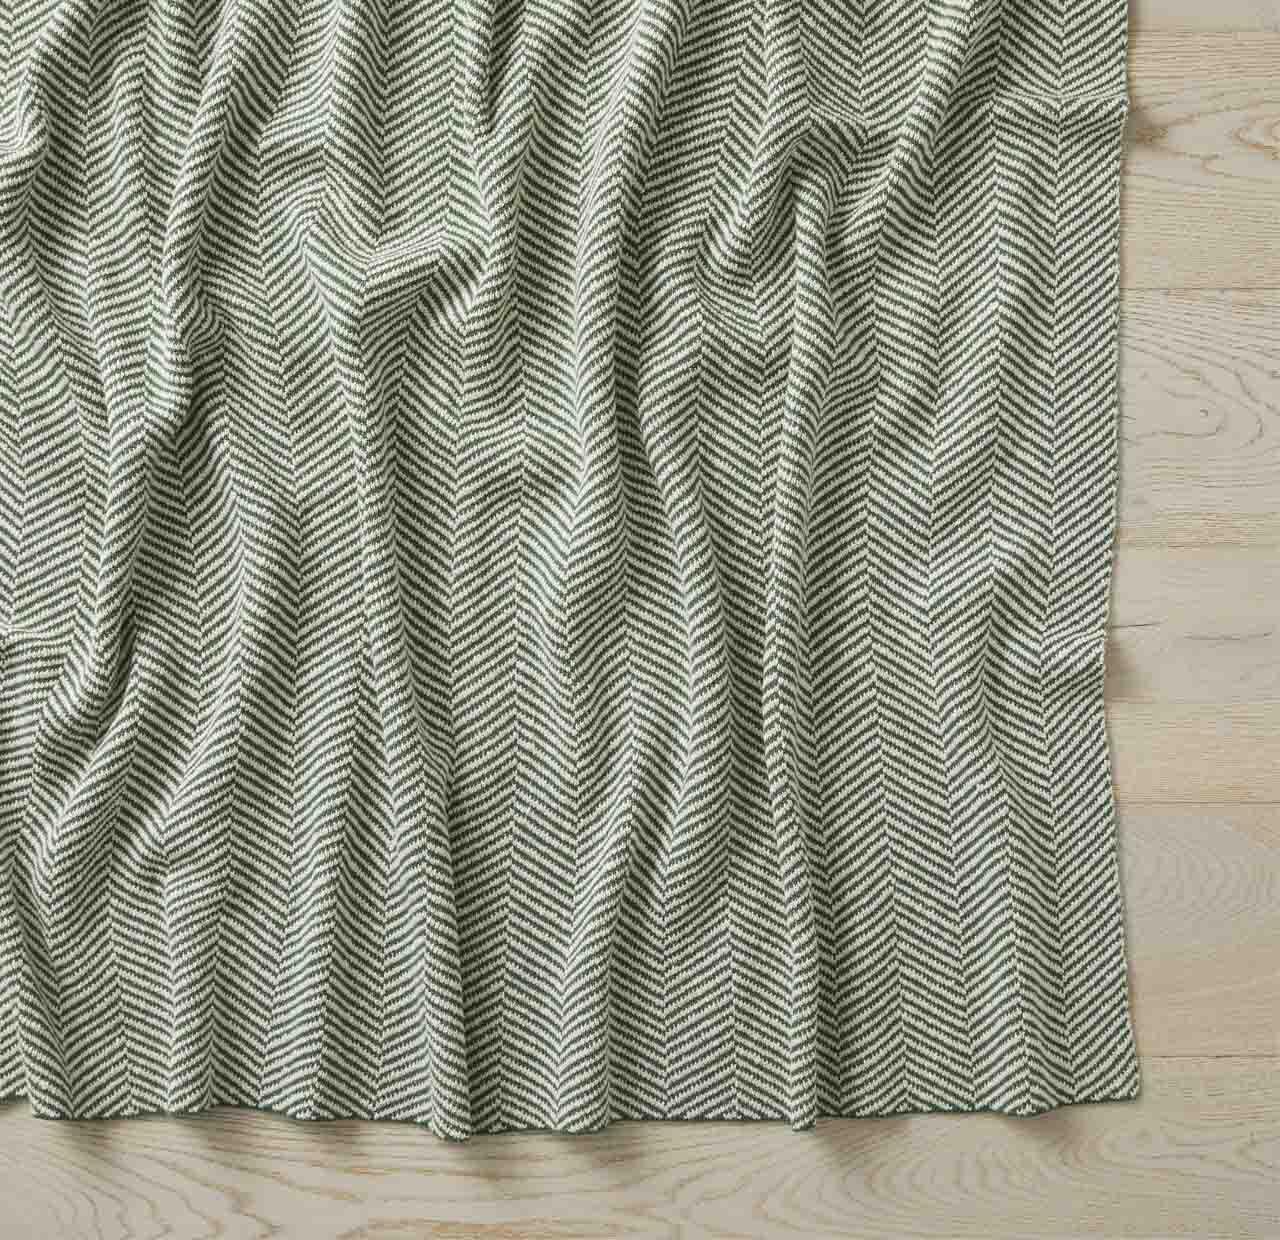 Weave Solano Throw - Jungle - ThrowBSE81JUNG 2